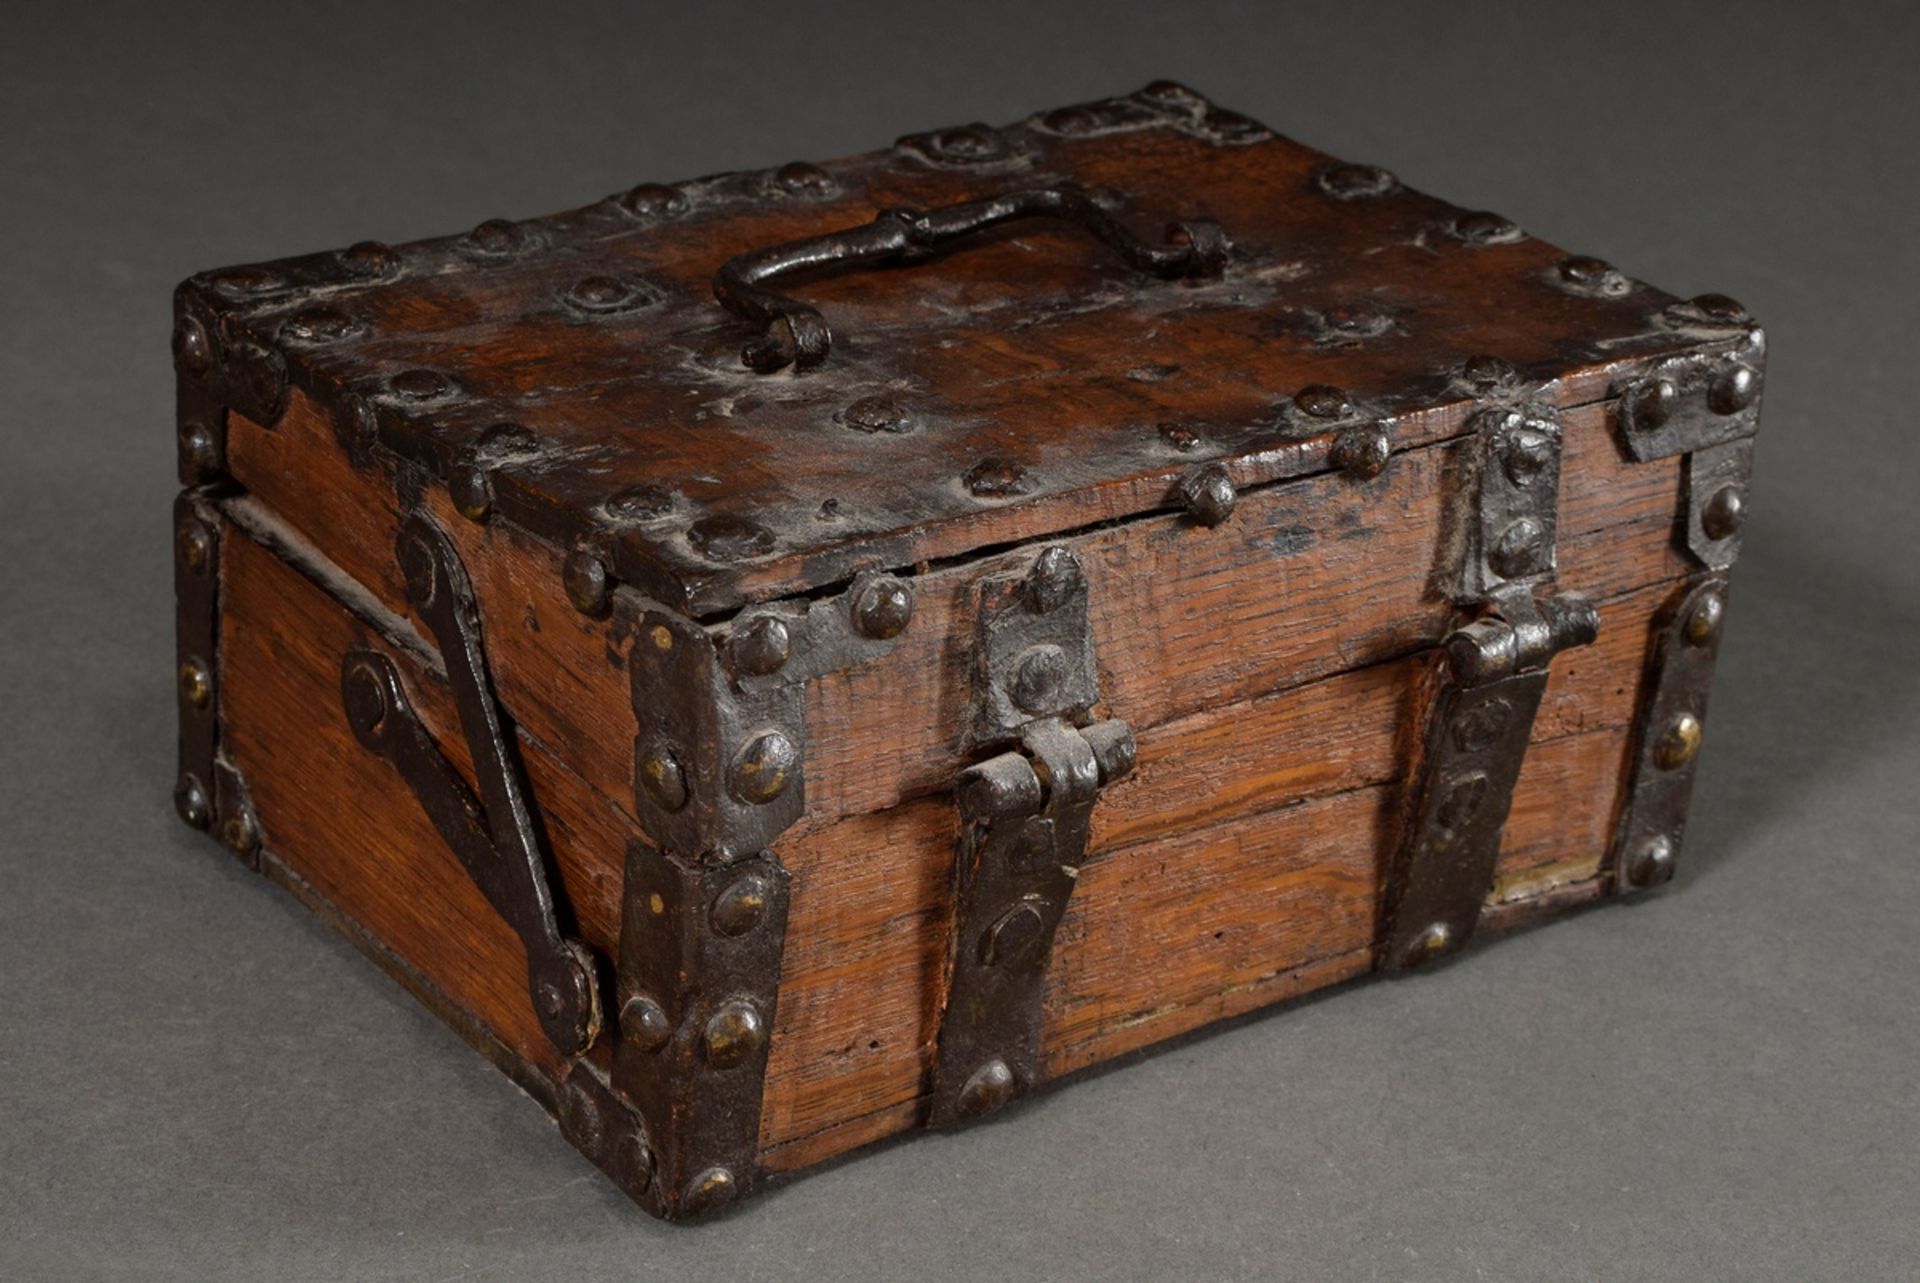 Rustic wooden box with iron band fittings and lock, probably 18th century, 10x20,5x14cm, various de - Image 2 of 7